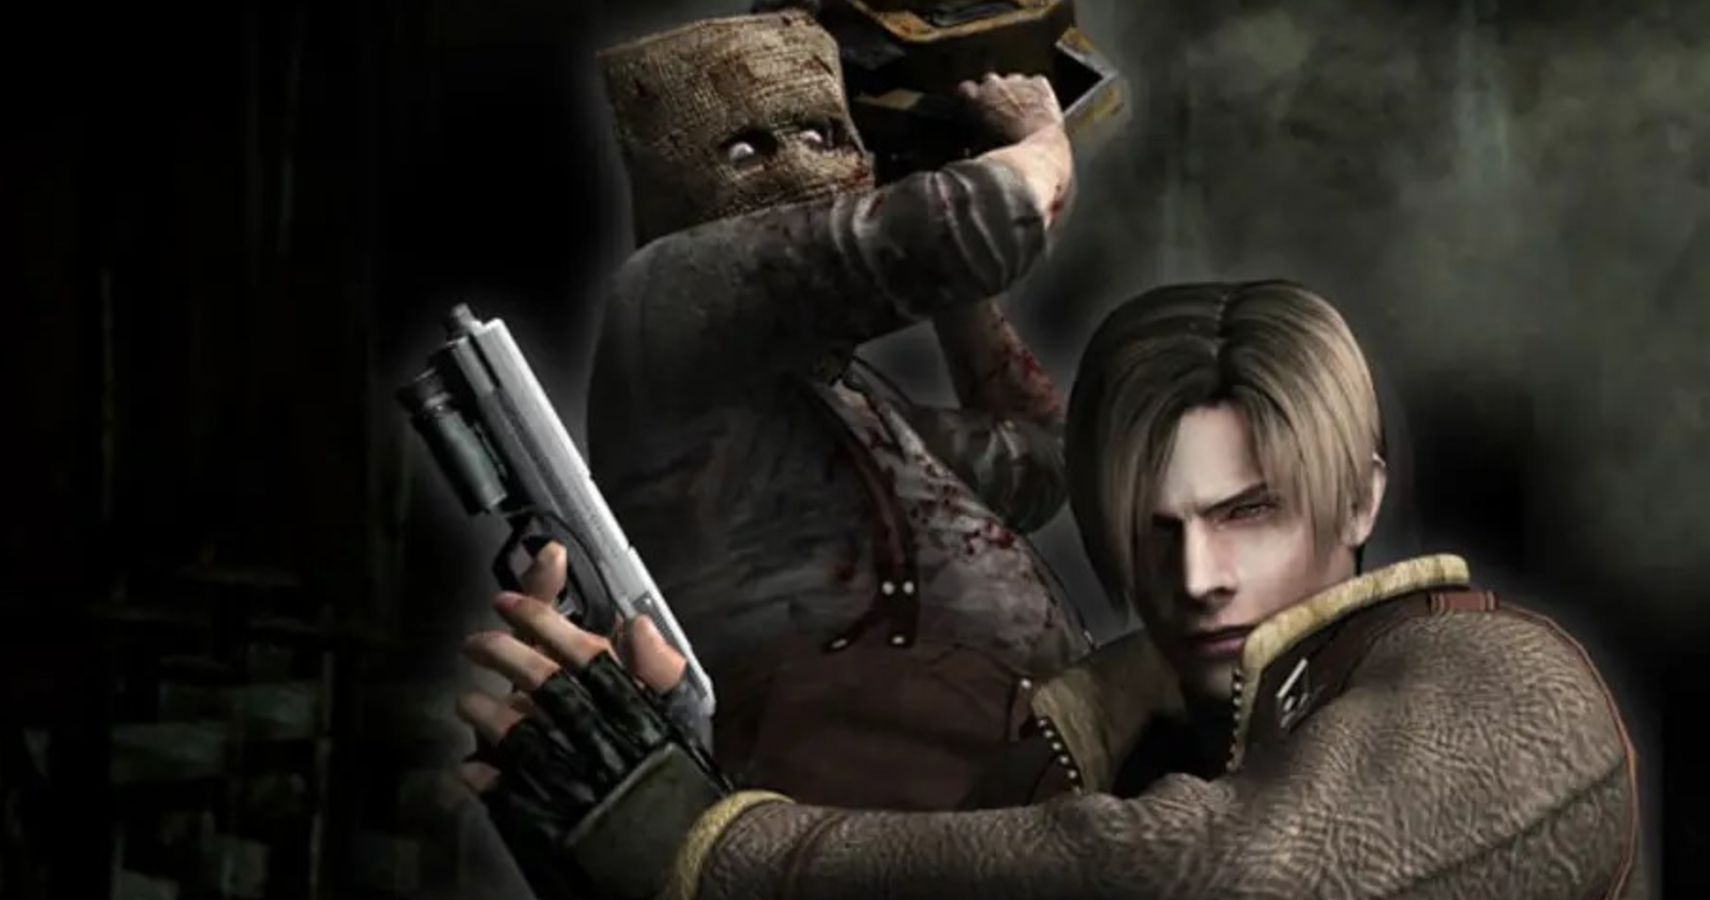 As a current-generation exclusive, Resident Evil 4 Remake graphics